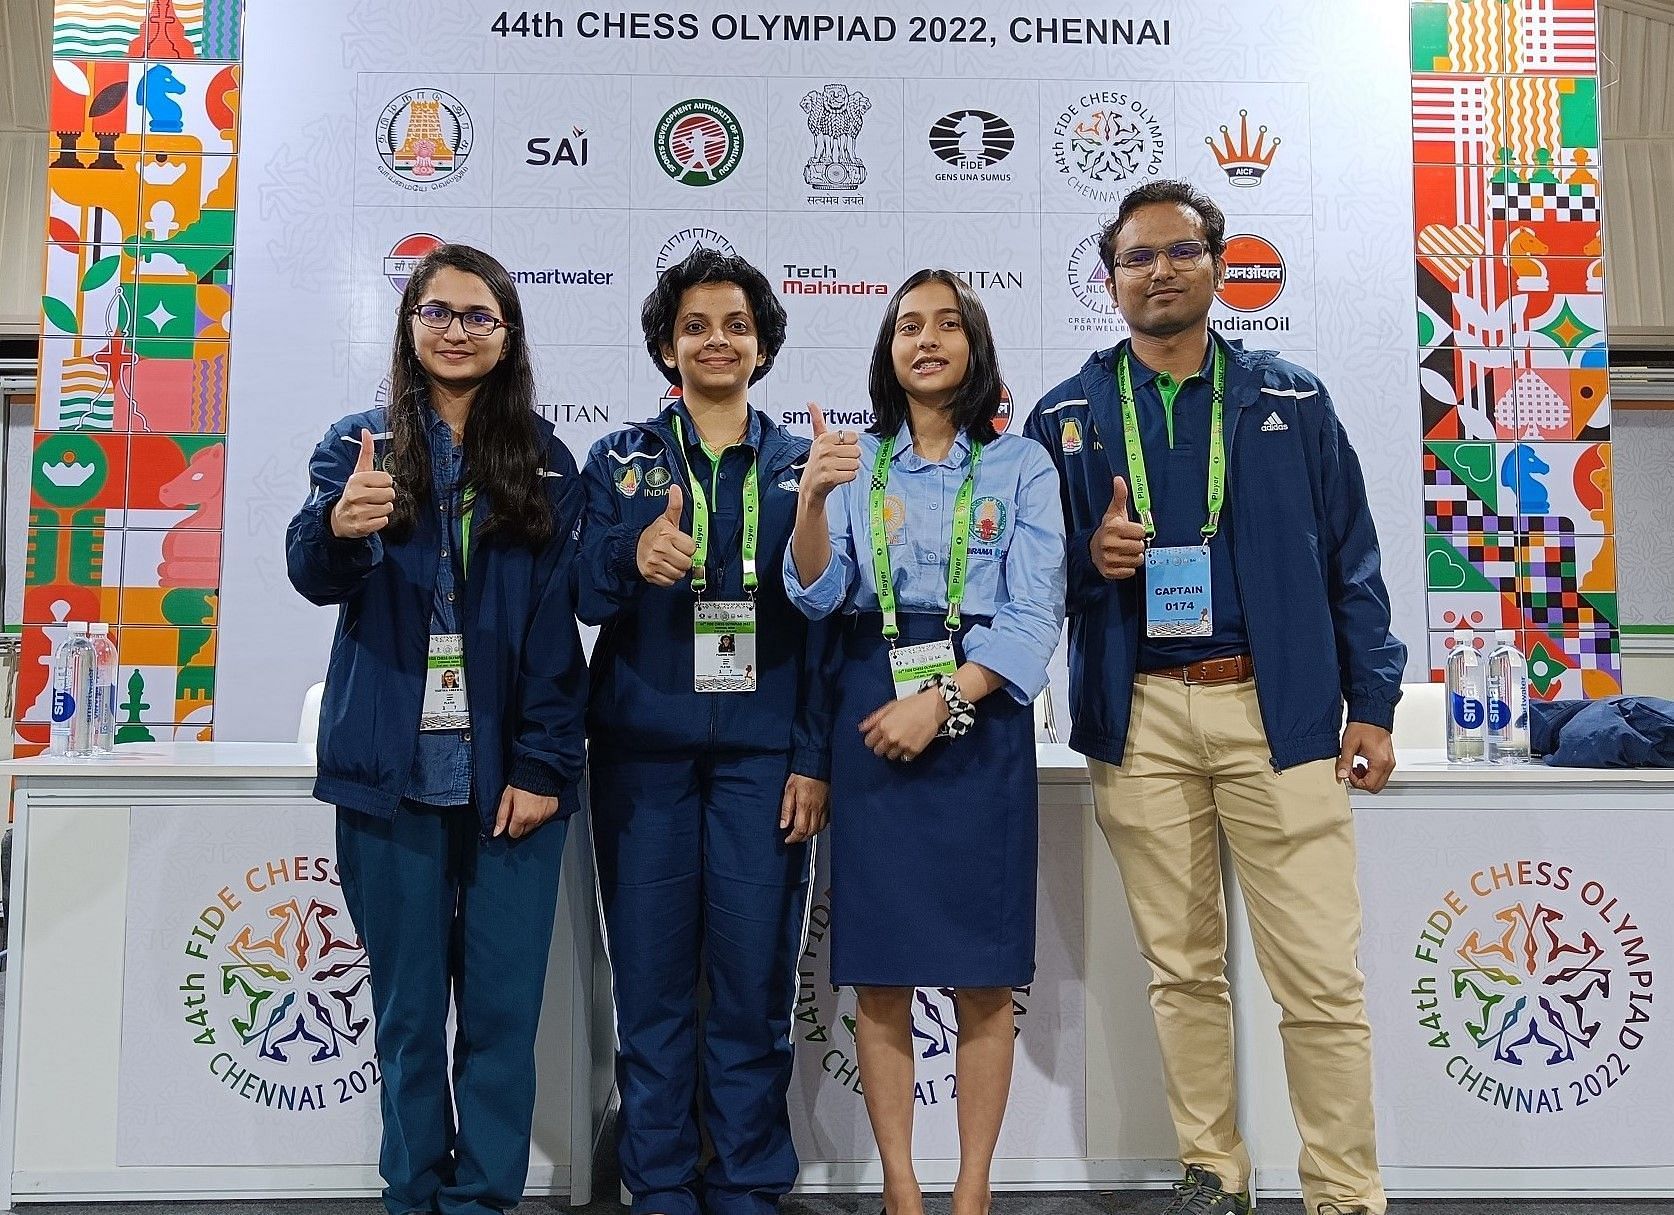 India B women&#039;s team beat Netherlands 3-1 in the tenth round of the 44th Chess Olympiad in Chennai on Monday. (Pic credit: FIDE/Lennart Ootes &amp; Stev Bonhage)